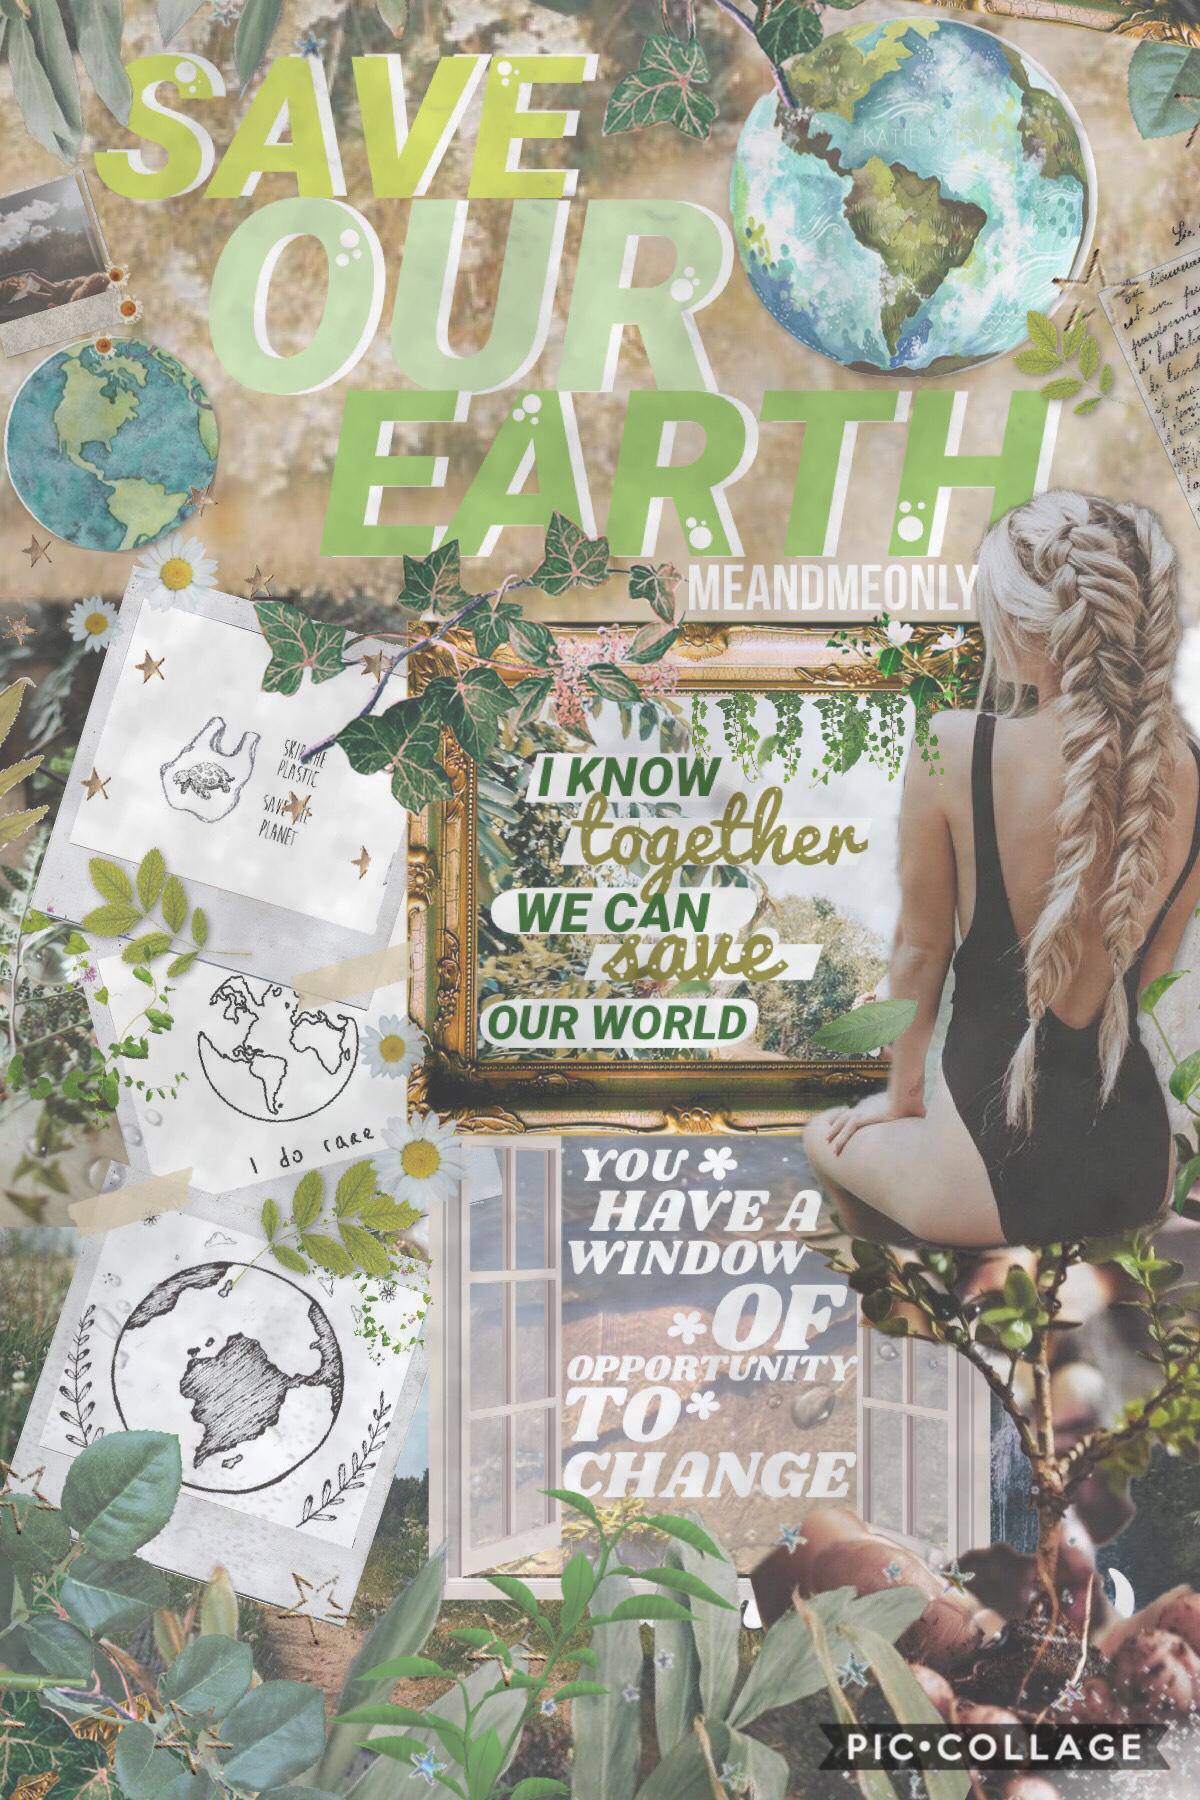 entry to @sakuracat’s contest! everyone go enter it and spread environmental awareness🌿✨ 
#SAVEOUREARTH
#CLIMATECHANGEISREAL
#THEREISNOPLANETB
#TAKEACTION
#PCONLY🍃🌾🌿
COME ON WE HAVE THE POWER TO SAVE OUR FUTURE💥❤️